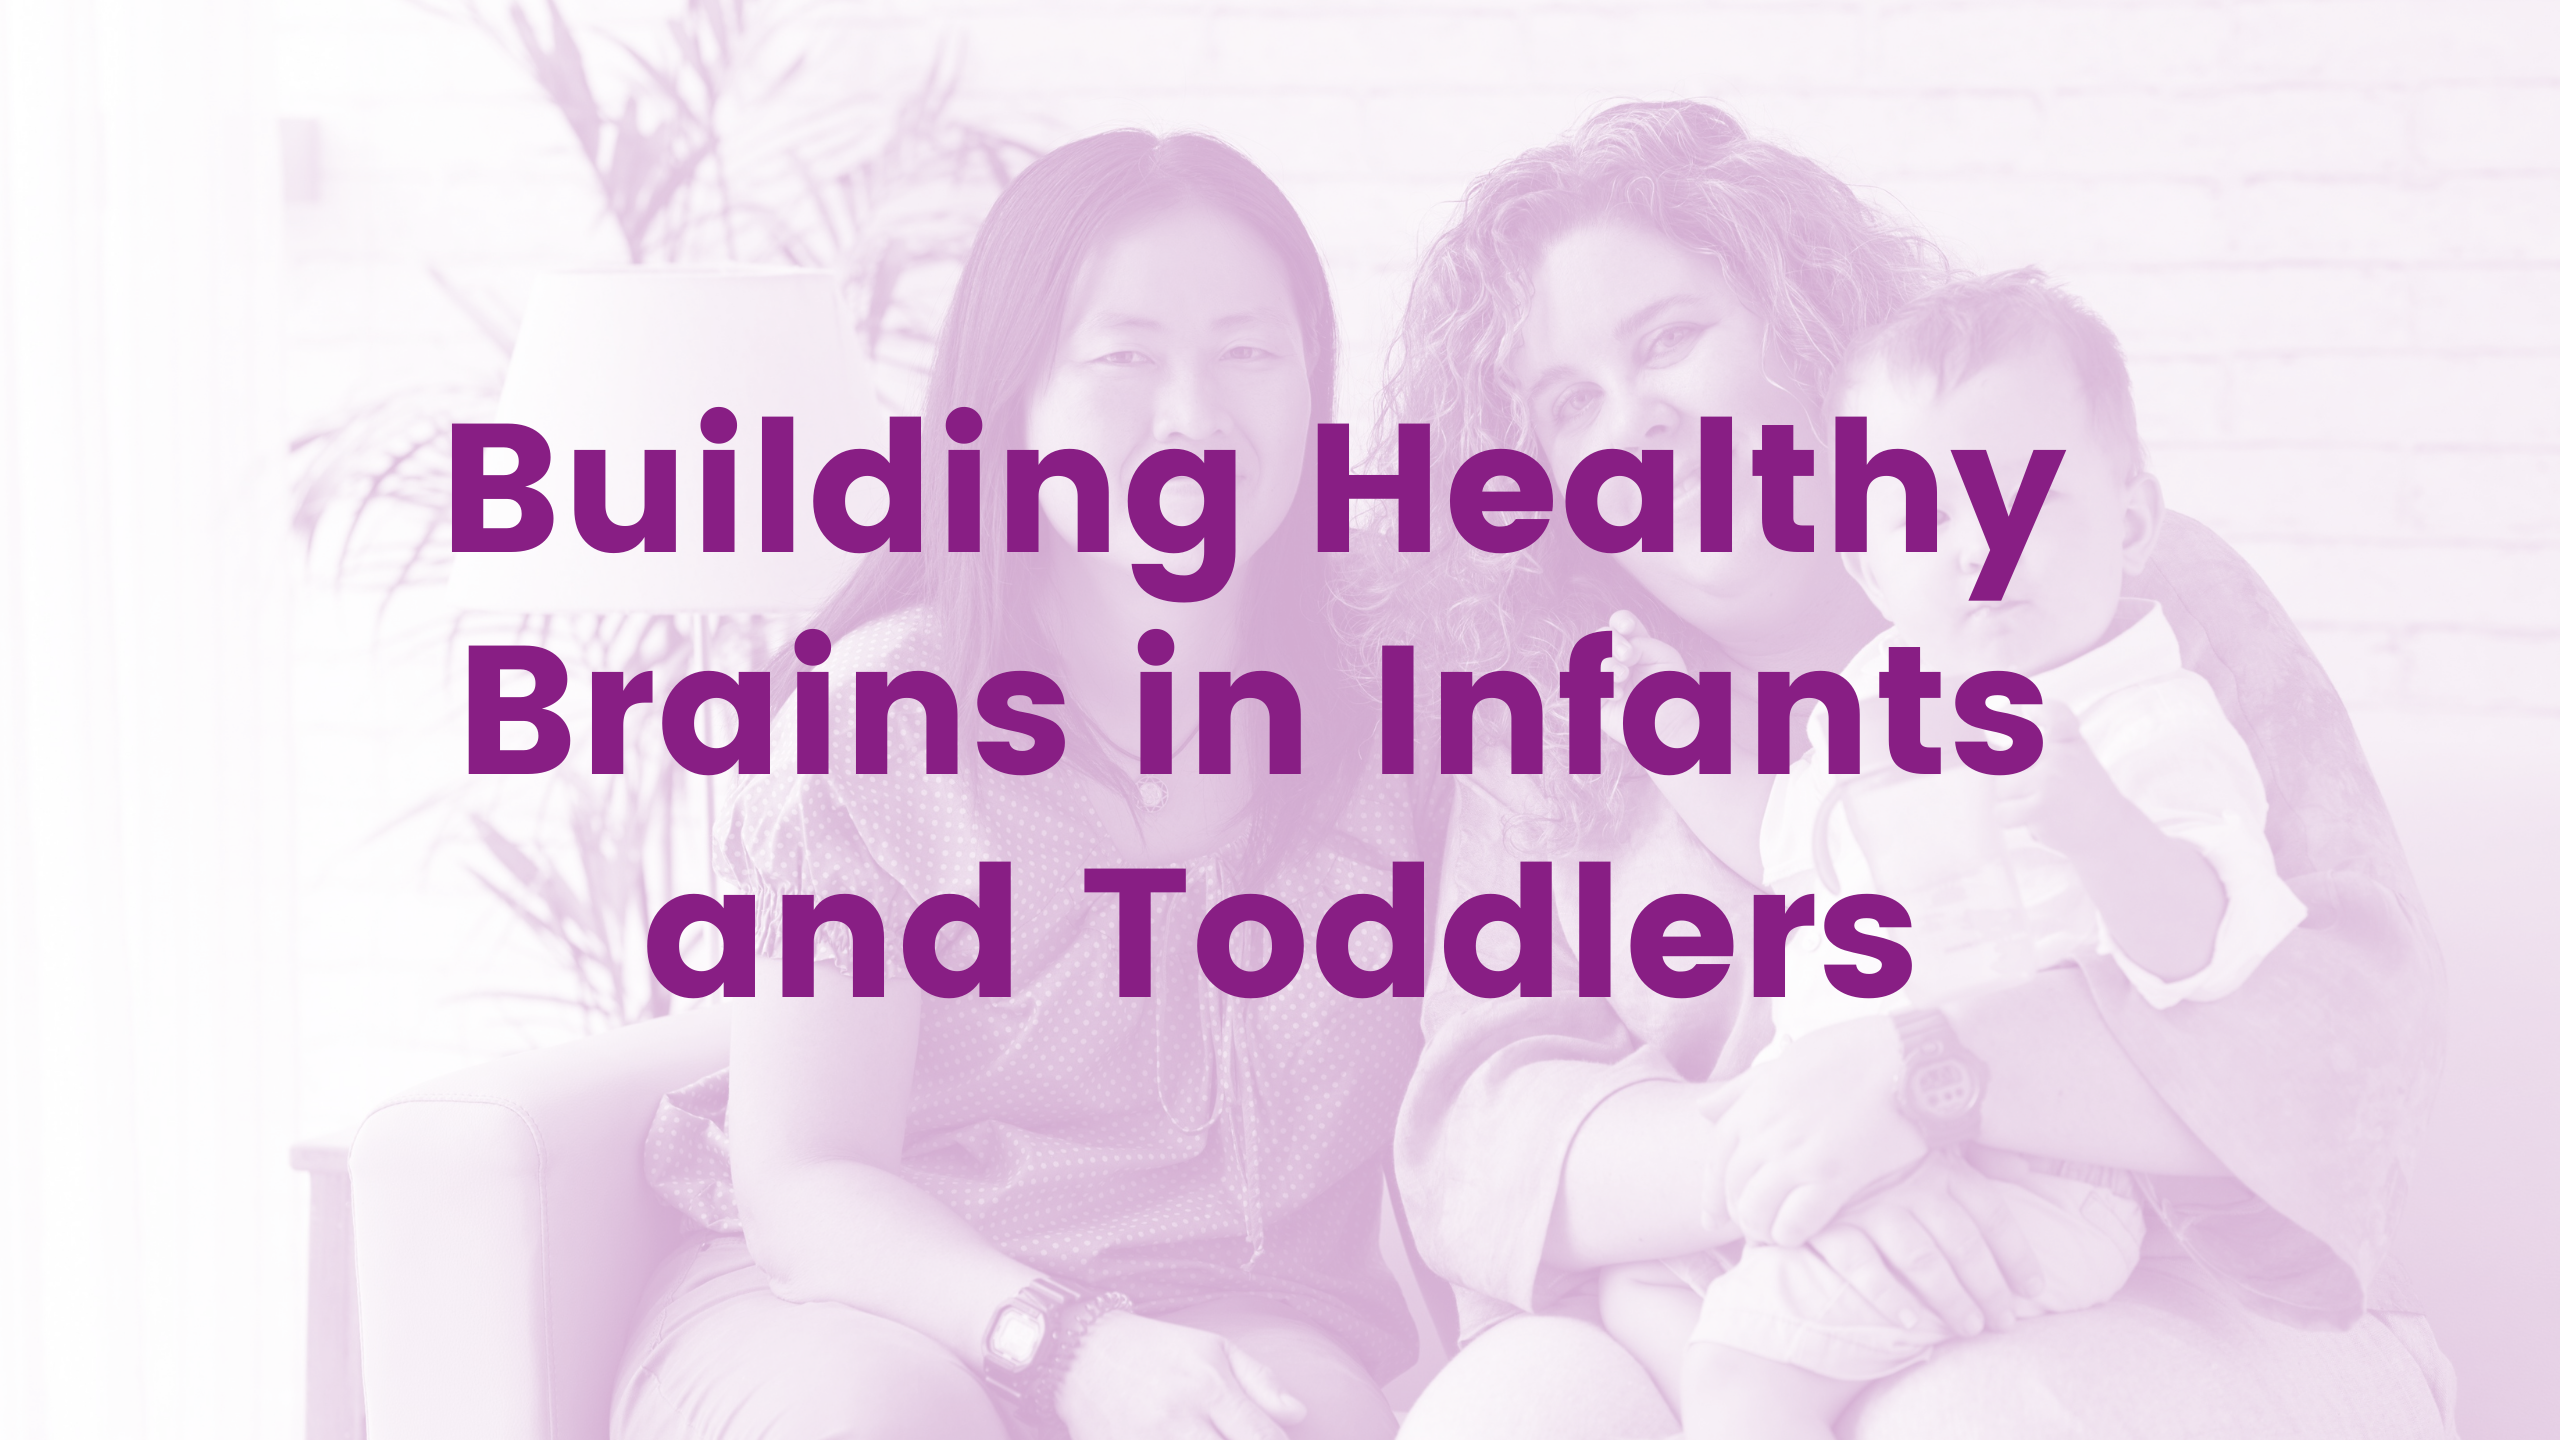 Building Healthy Brains in Infants and Toddlers Webinar